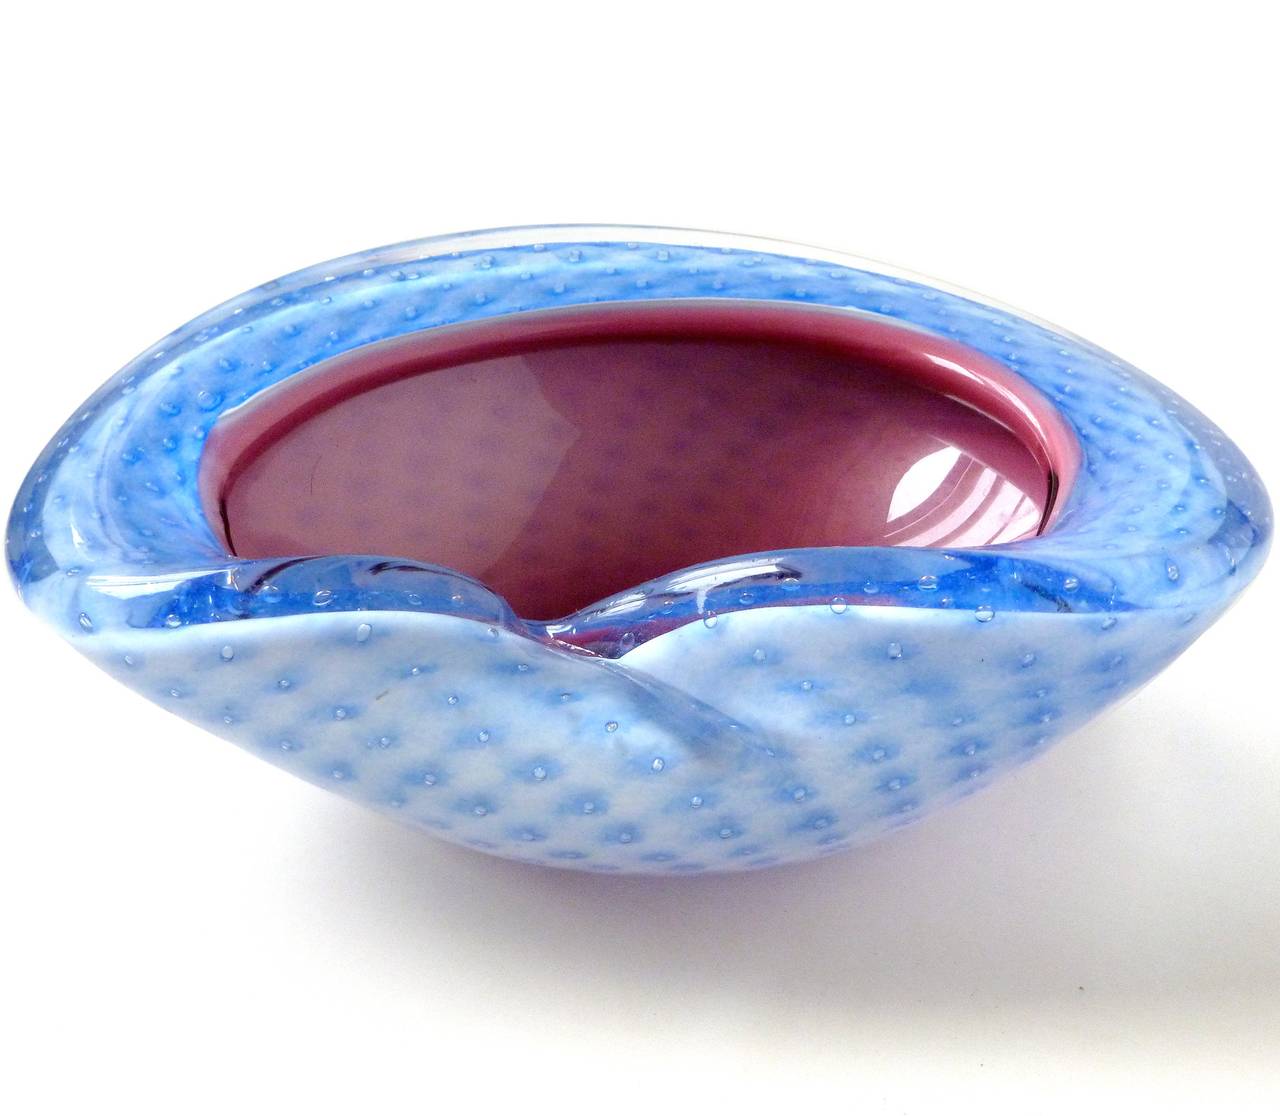 Hand-Crafted Fratelli Toso Murano Blue Pink Controlled Bubbles Italian Art Glass Bowls